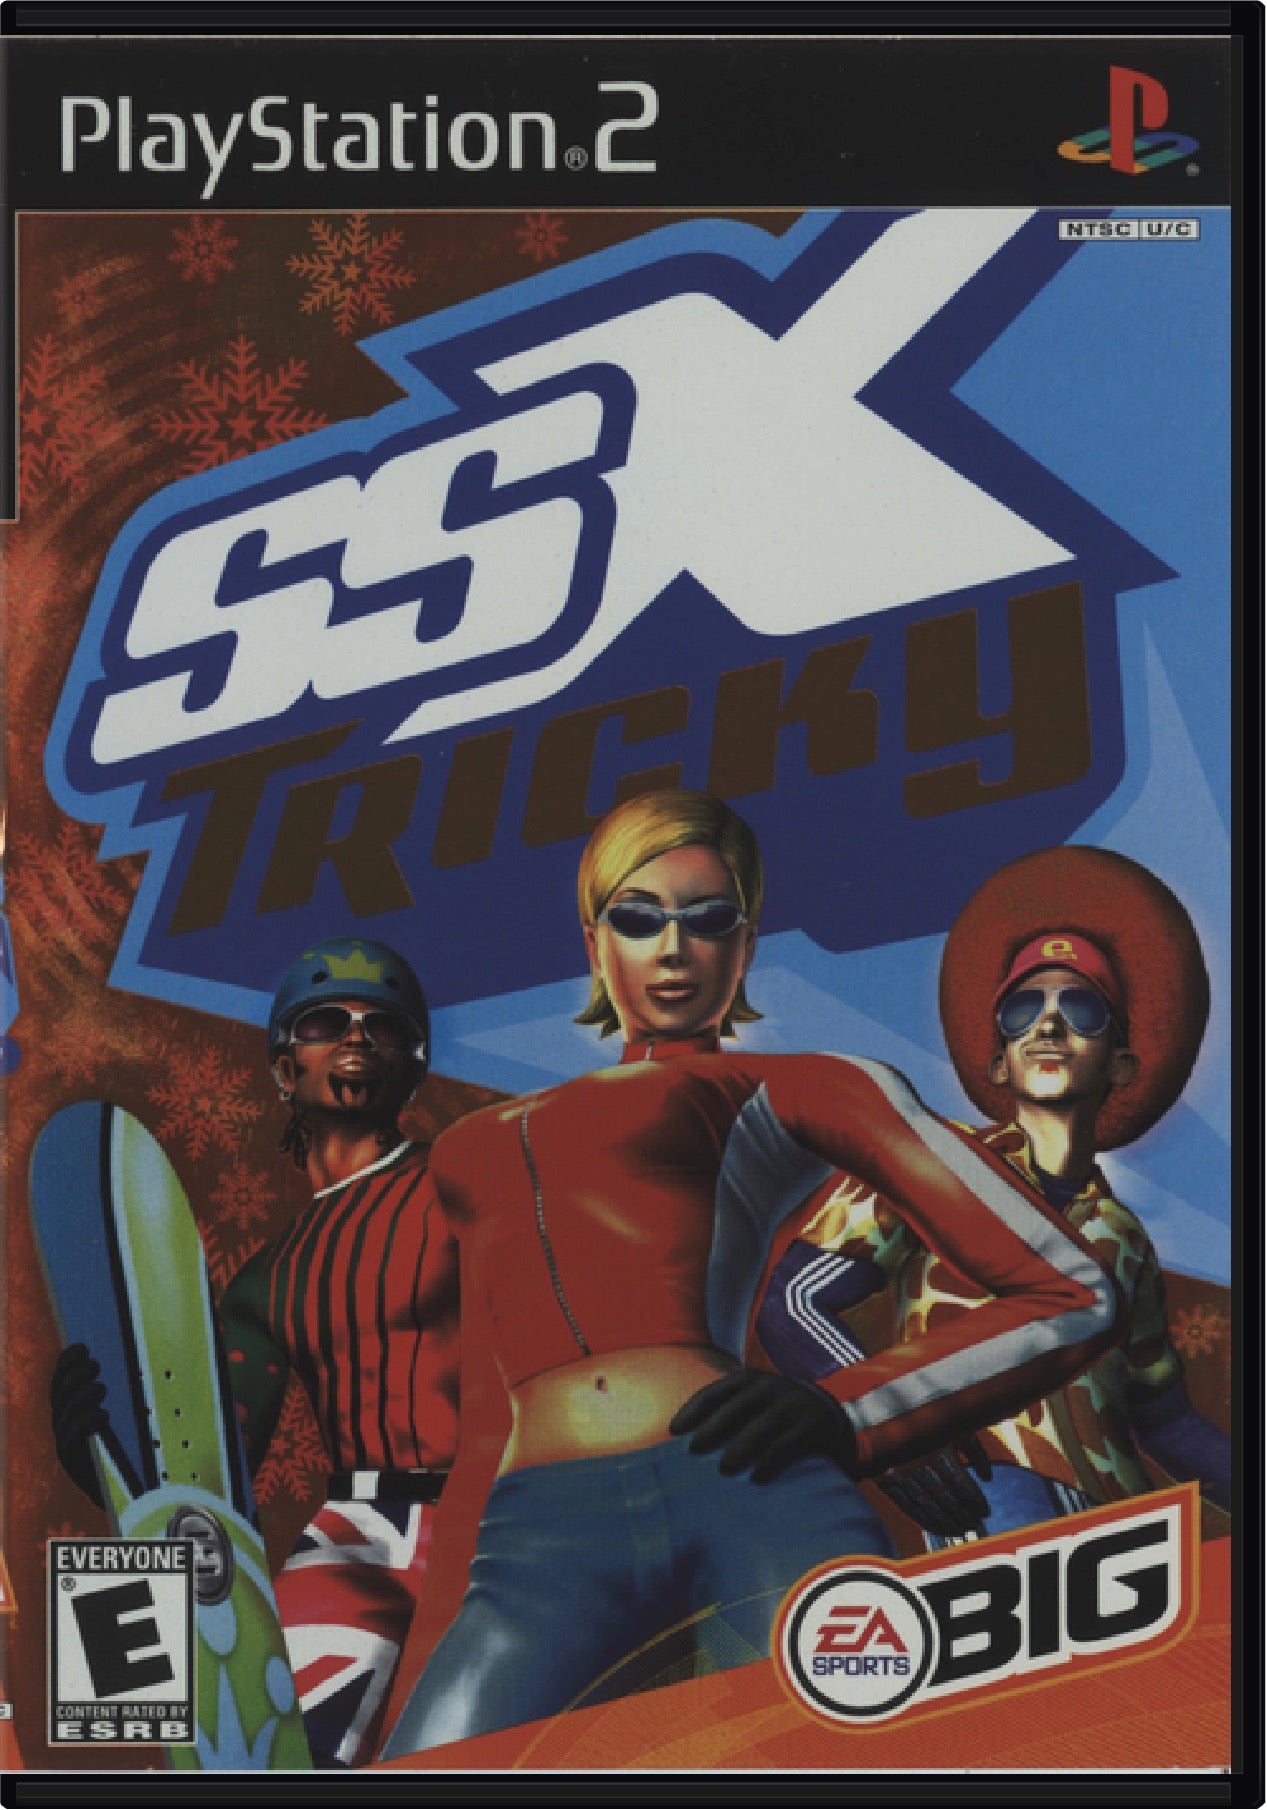 SSX Tricky Cover Art and Product Photo